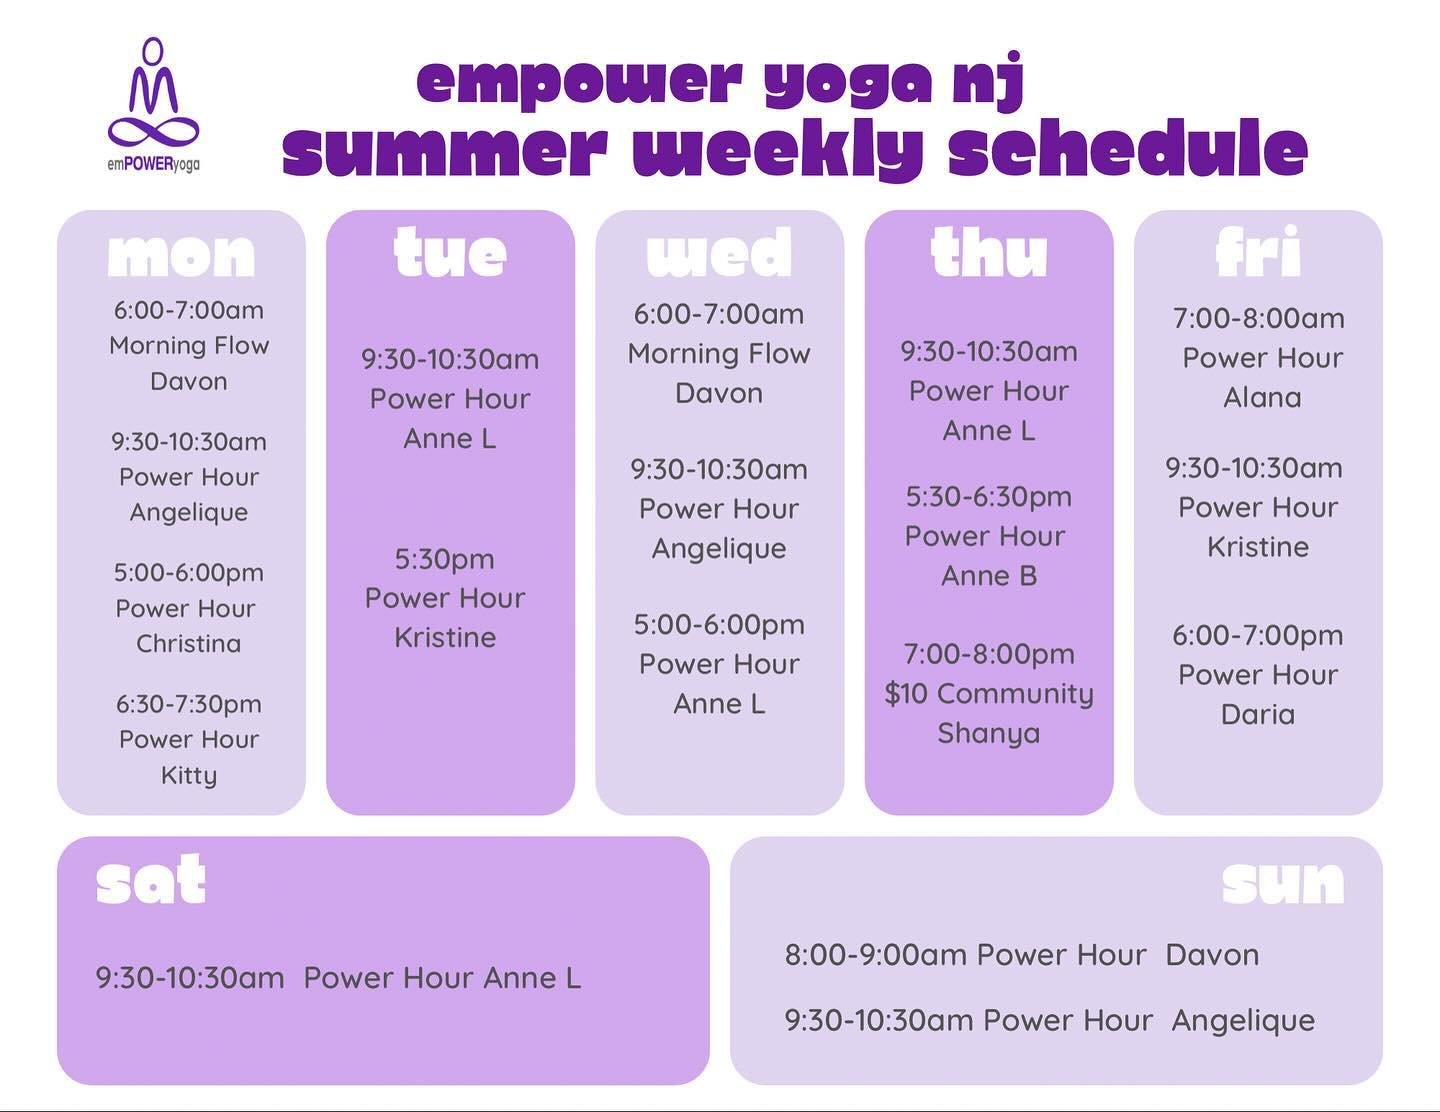 Summer Schedule starts JUNE 1! ☀️ 

Saturday Schedule 

8:00-9:00am
Yoga Sculpt (Warm) 
with Christina 

9:30-10:30am
Power Hour (Heated) 
with Anne 

11:00-12:00pm
Half Yin Half Power (Heated) 
with Keri 

Anytime
On Demand Class of the day

#empowe